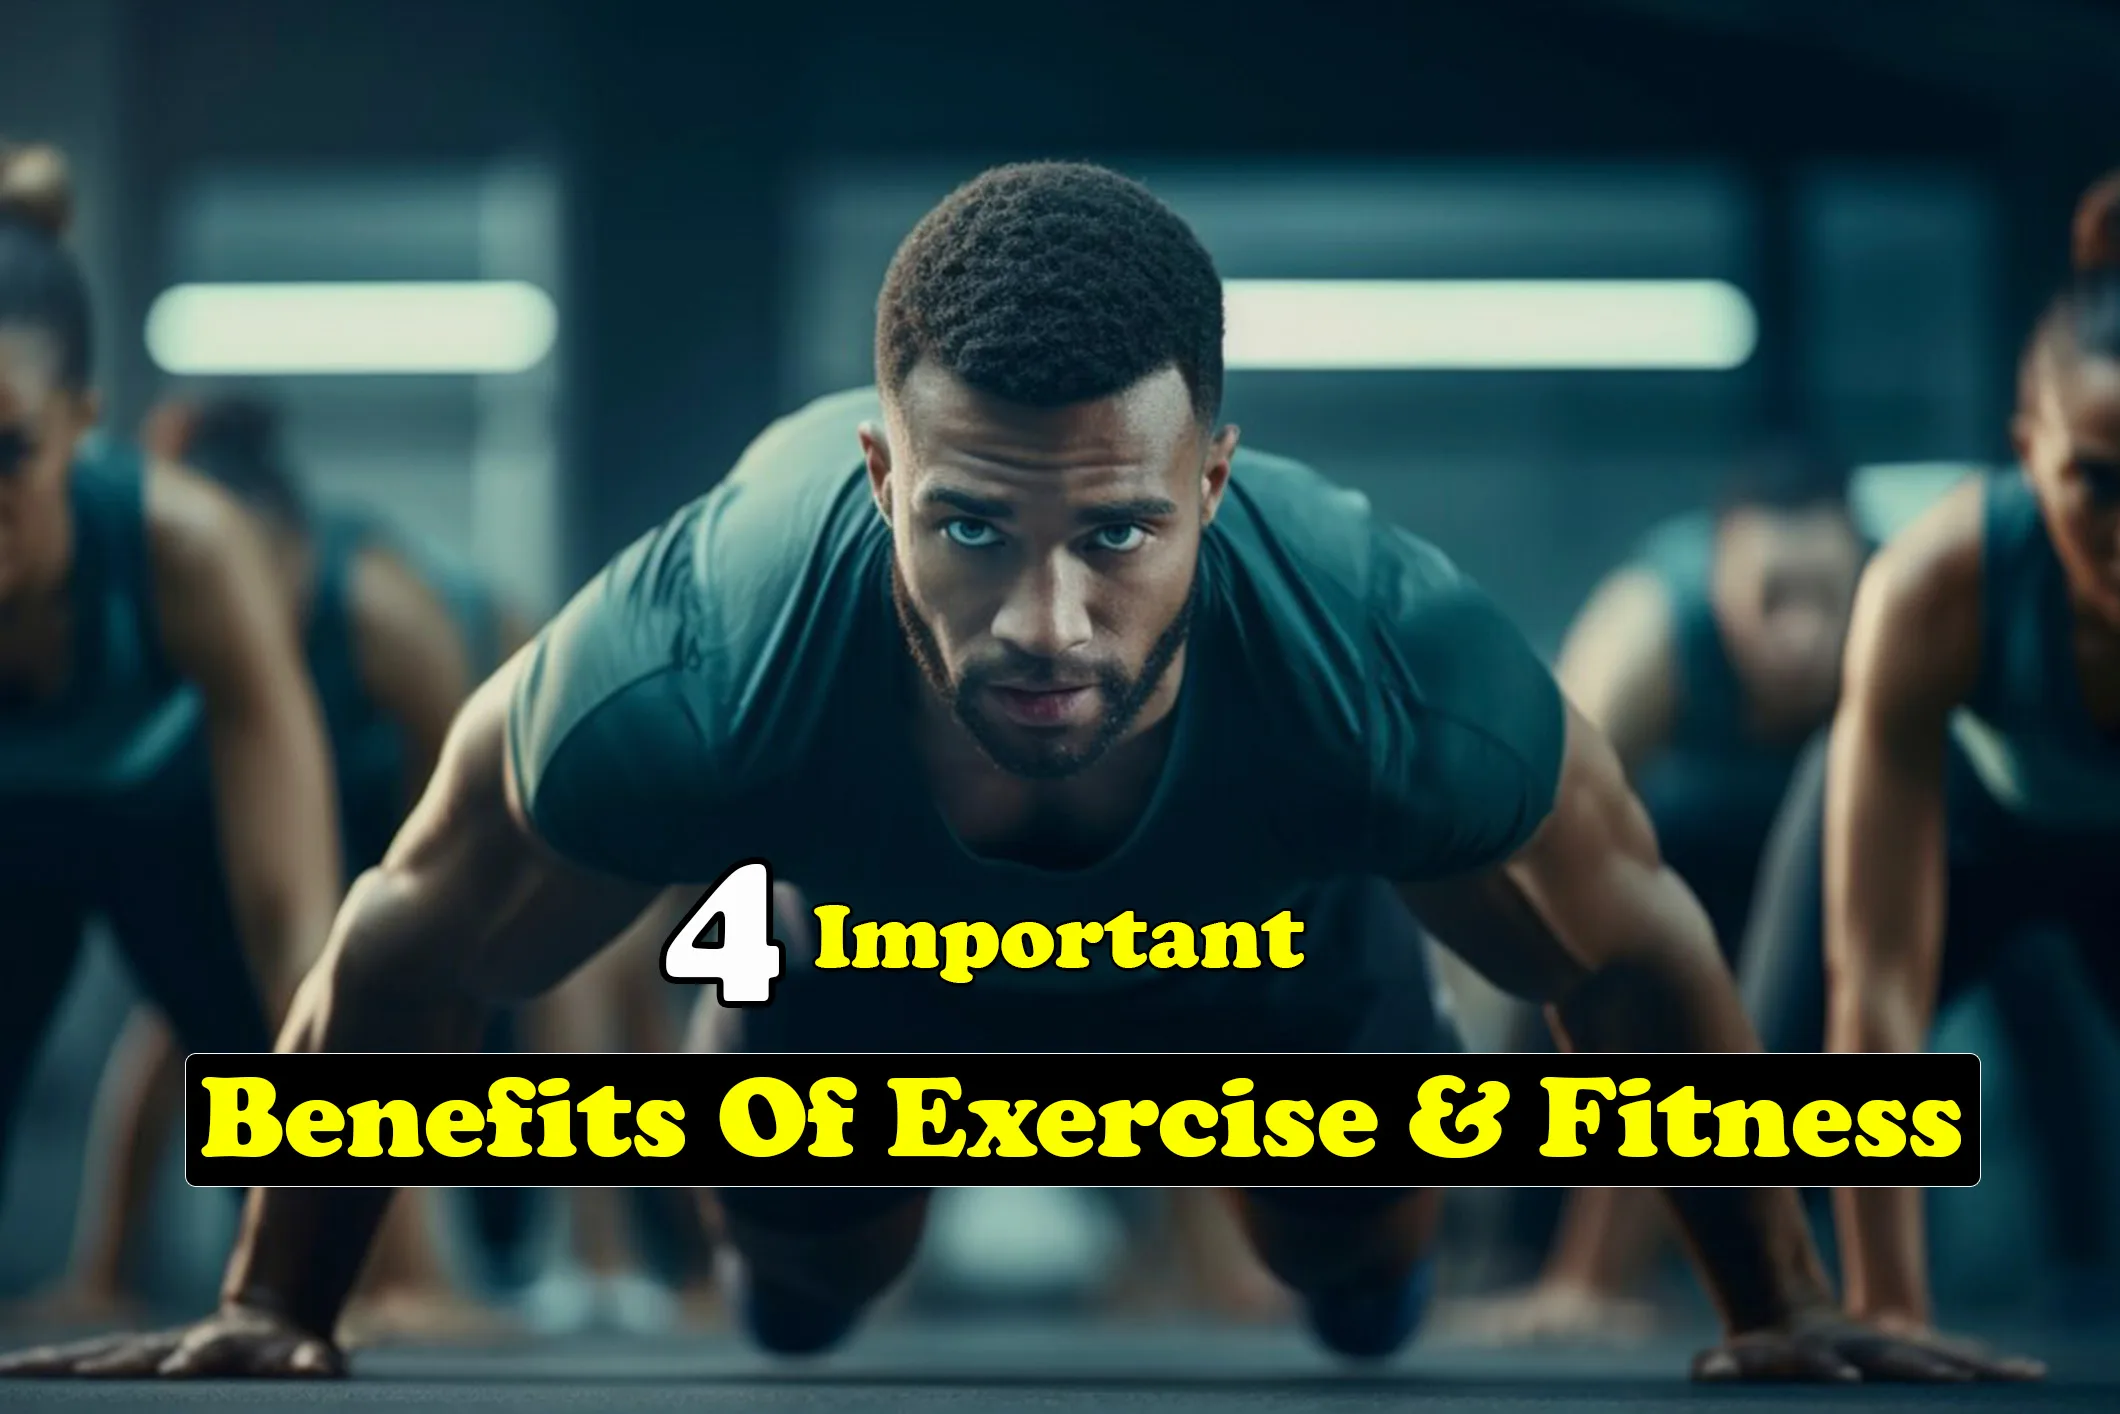 4 Important Benefits Of Exercise & Fitness